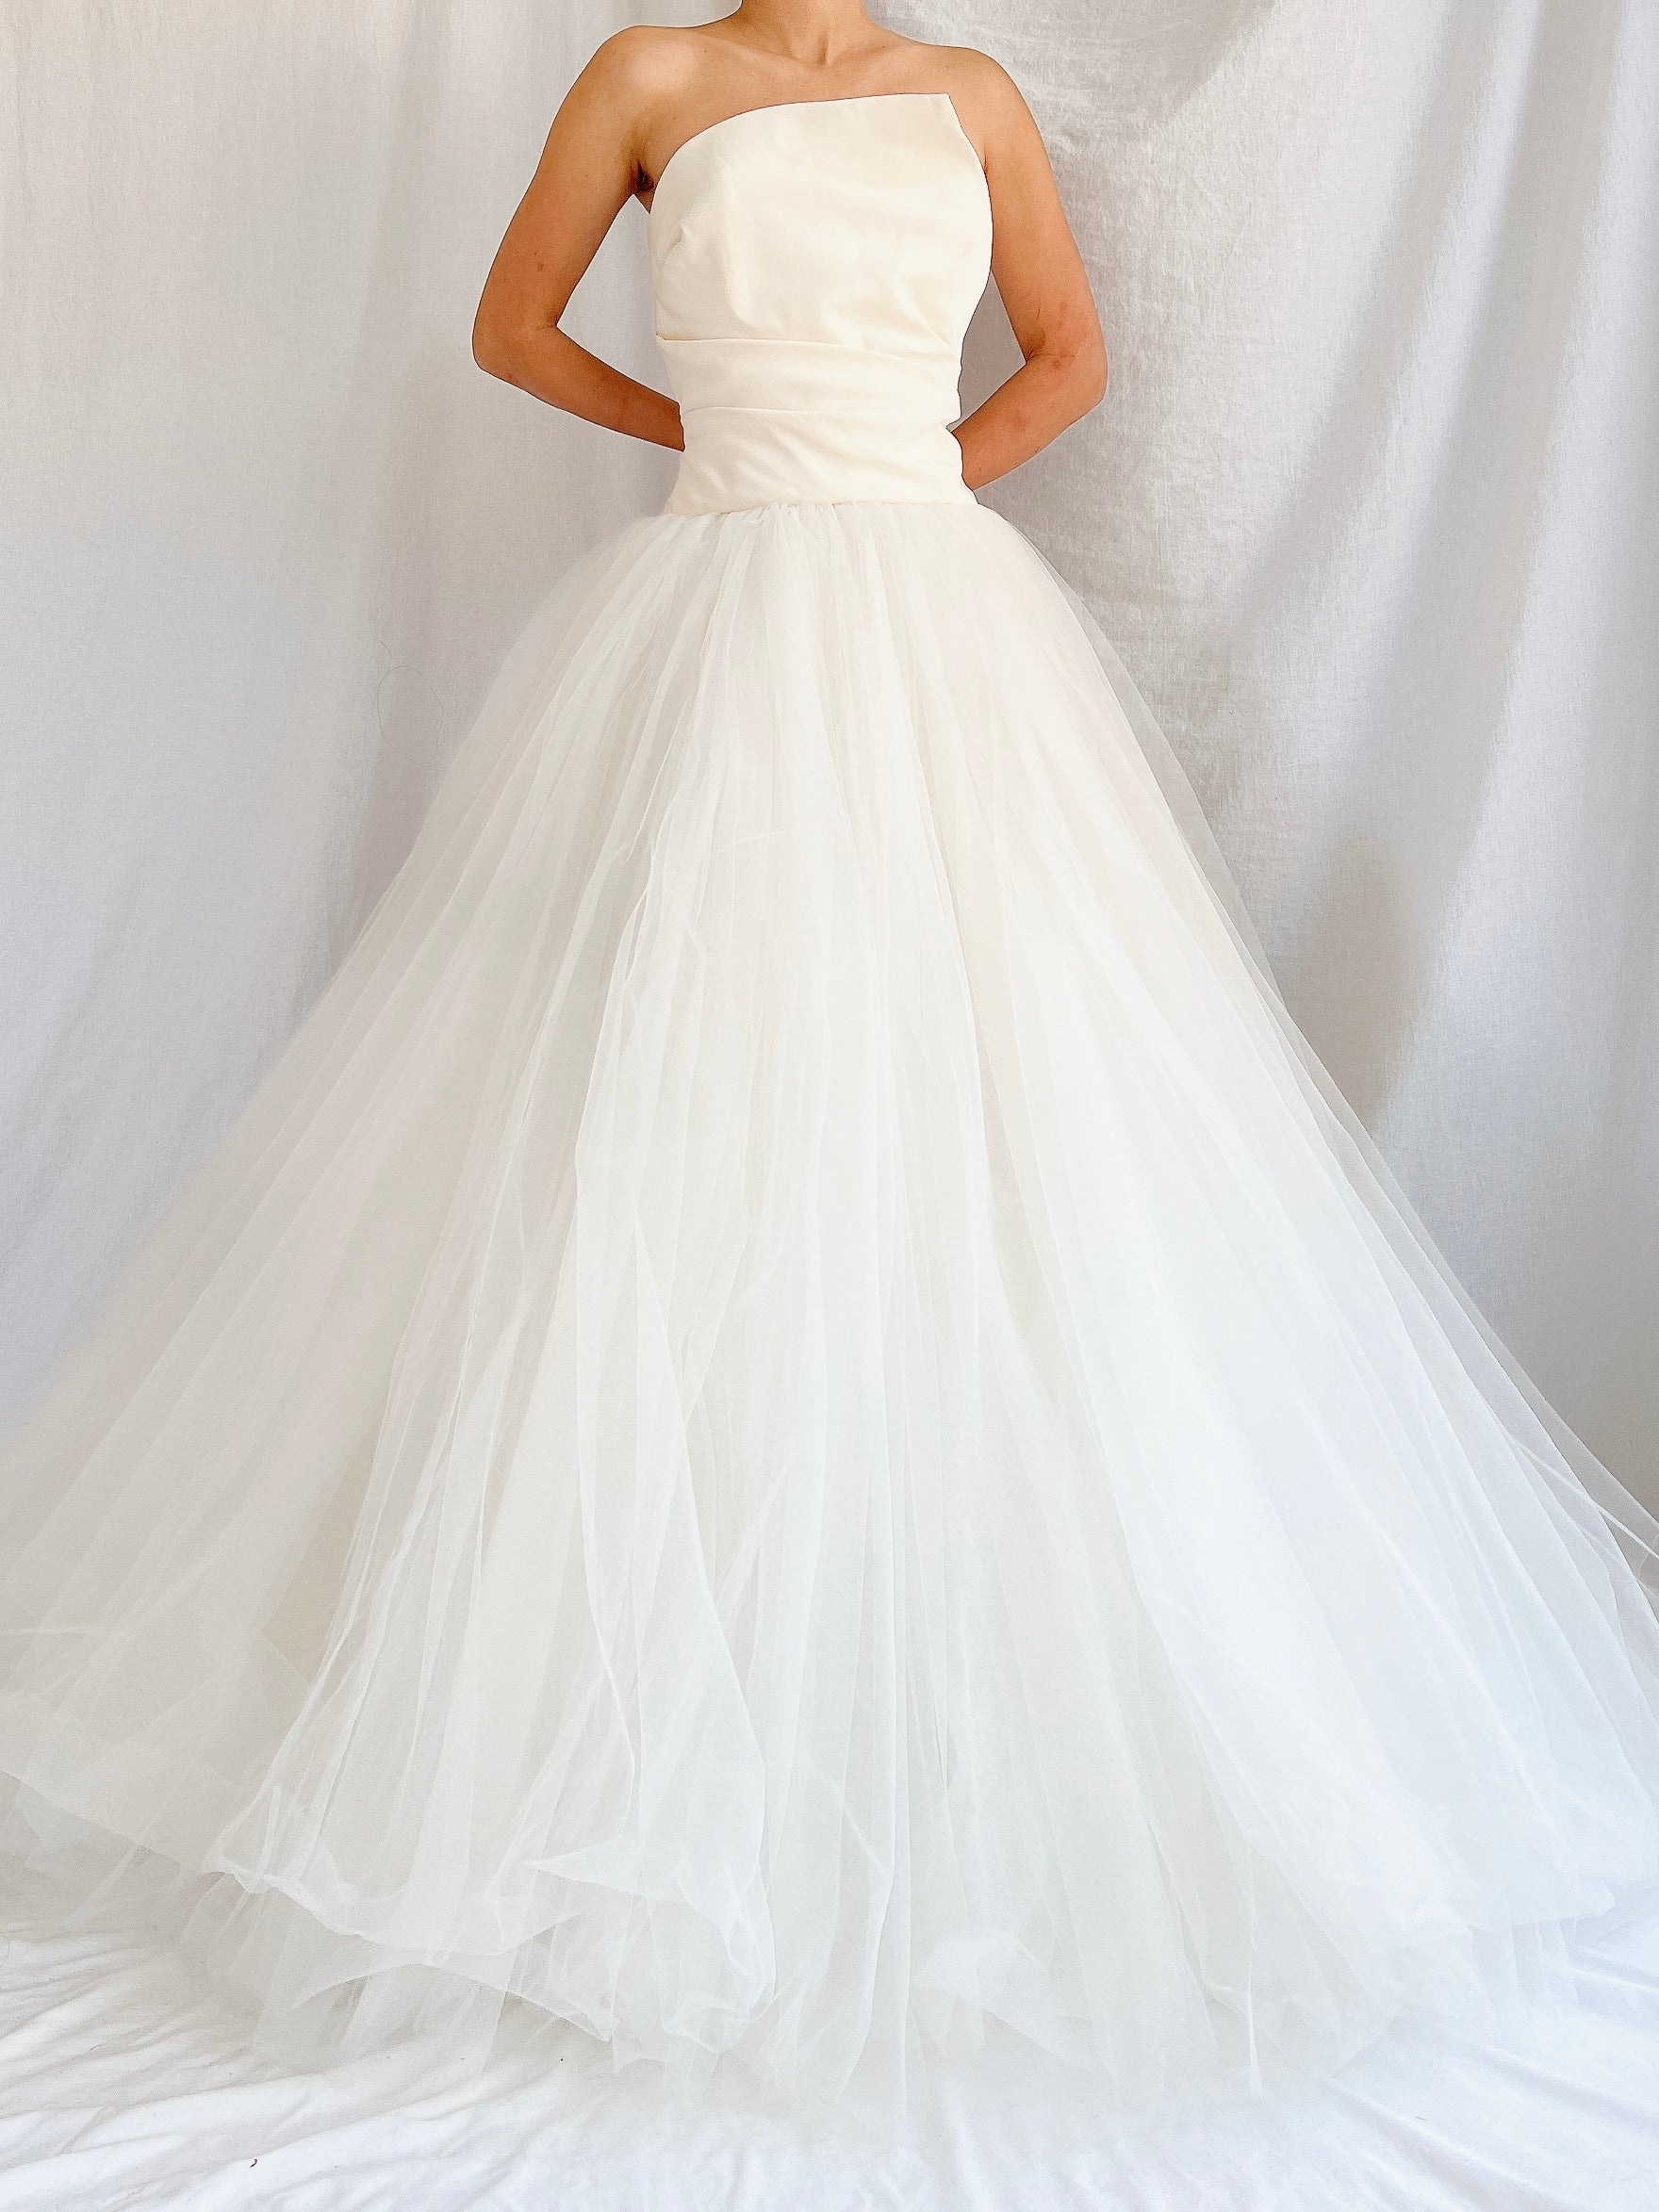 Vintage Tulle Gown - S/M 6/8